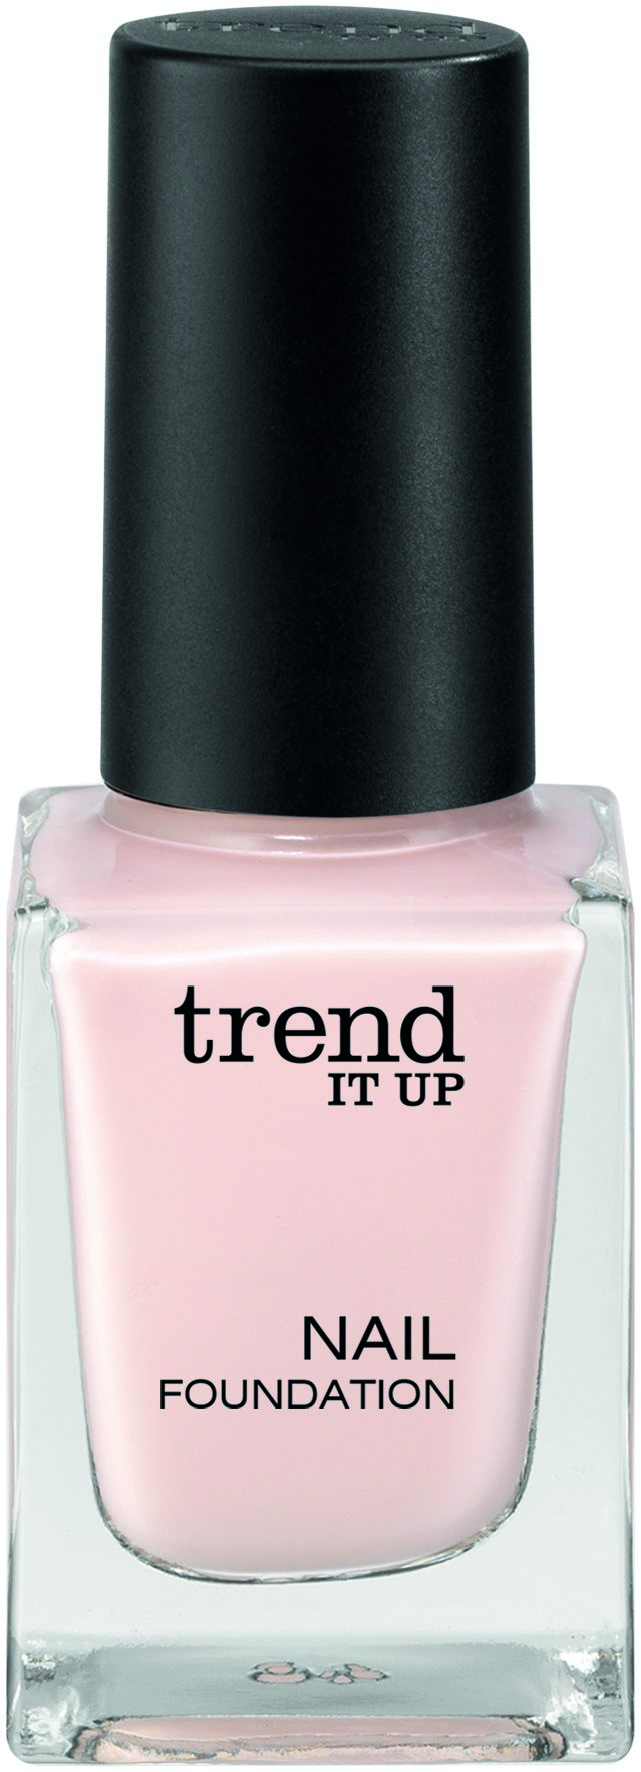 trend IT UP Nail Foundation Nagellack, 11 ml, 2,25 €